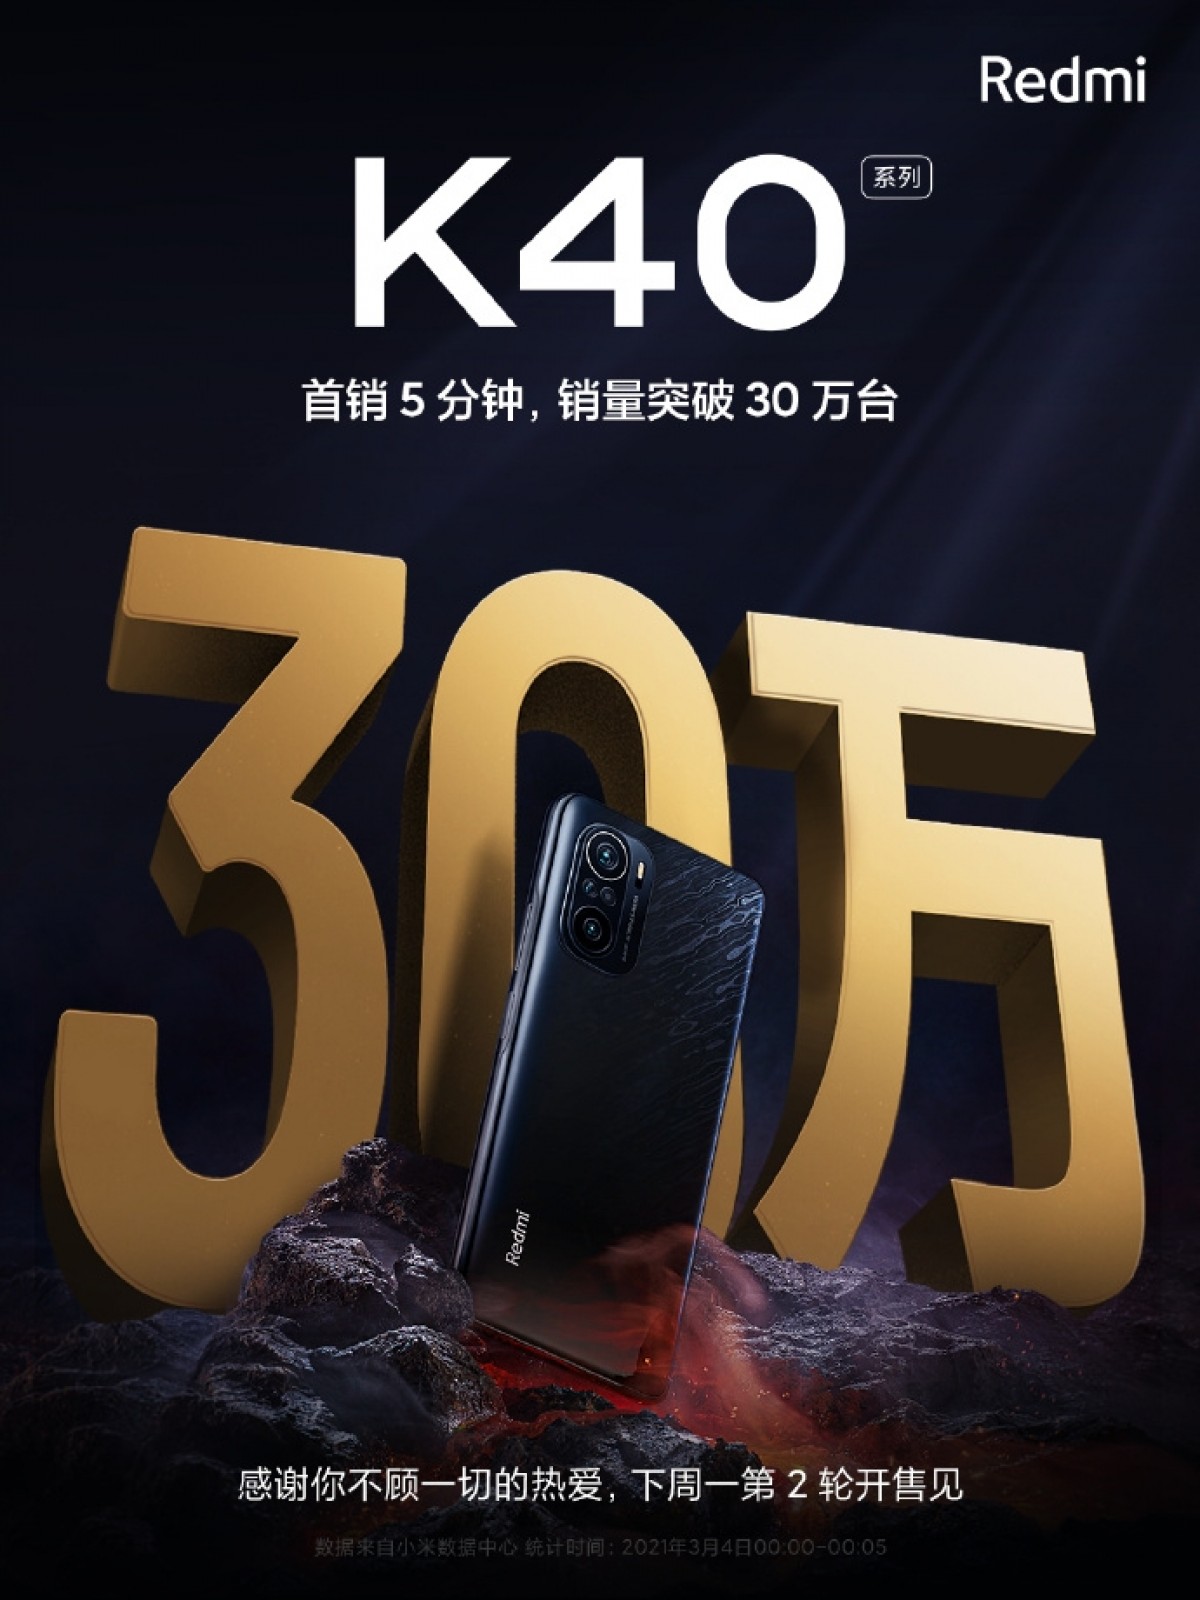 Xiaomi sells over 300,000 units of the Redmi K40 in five minutes